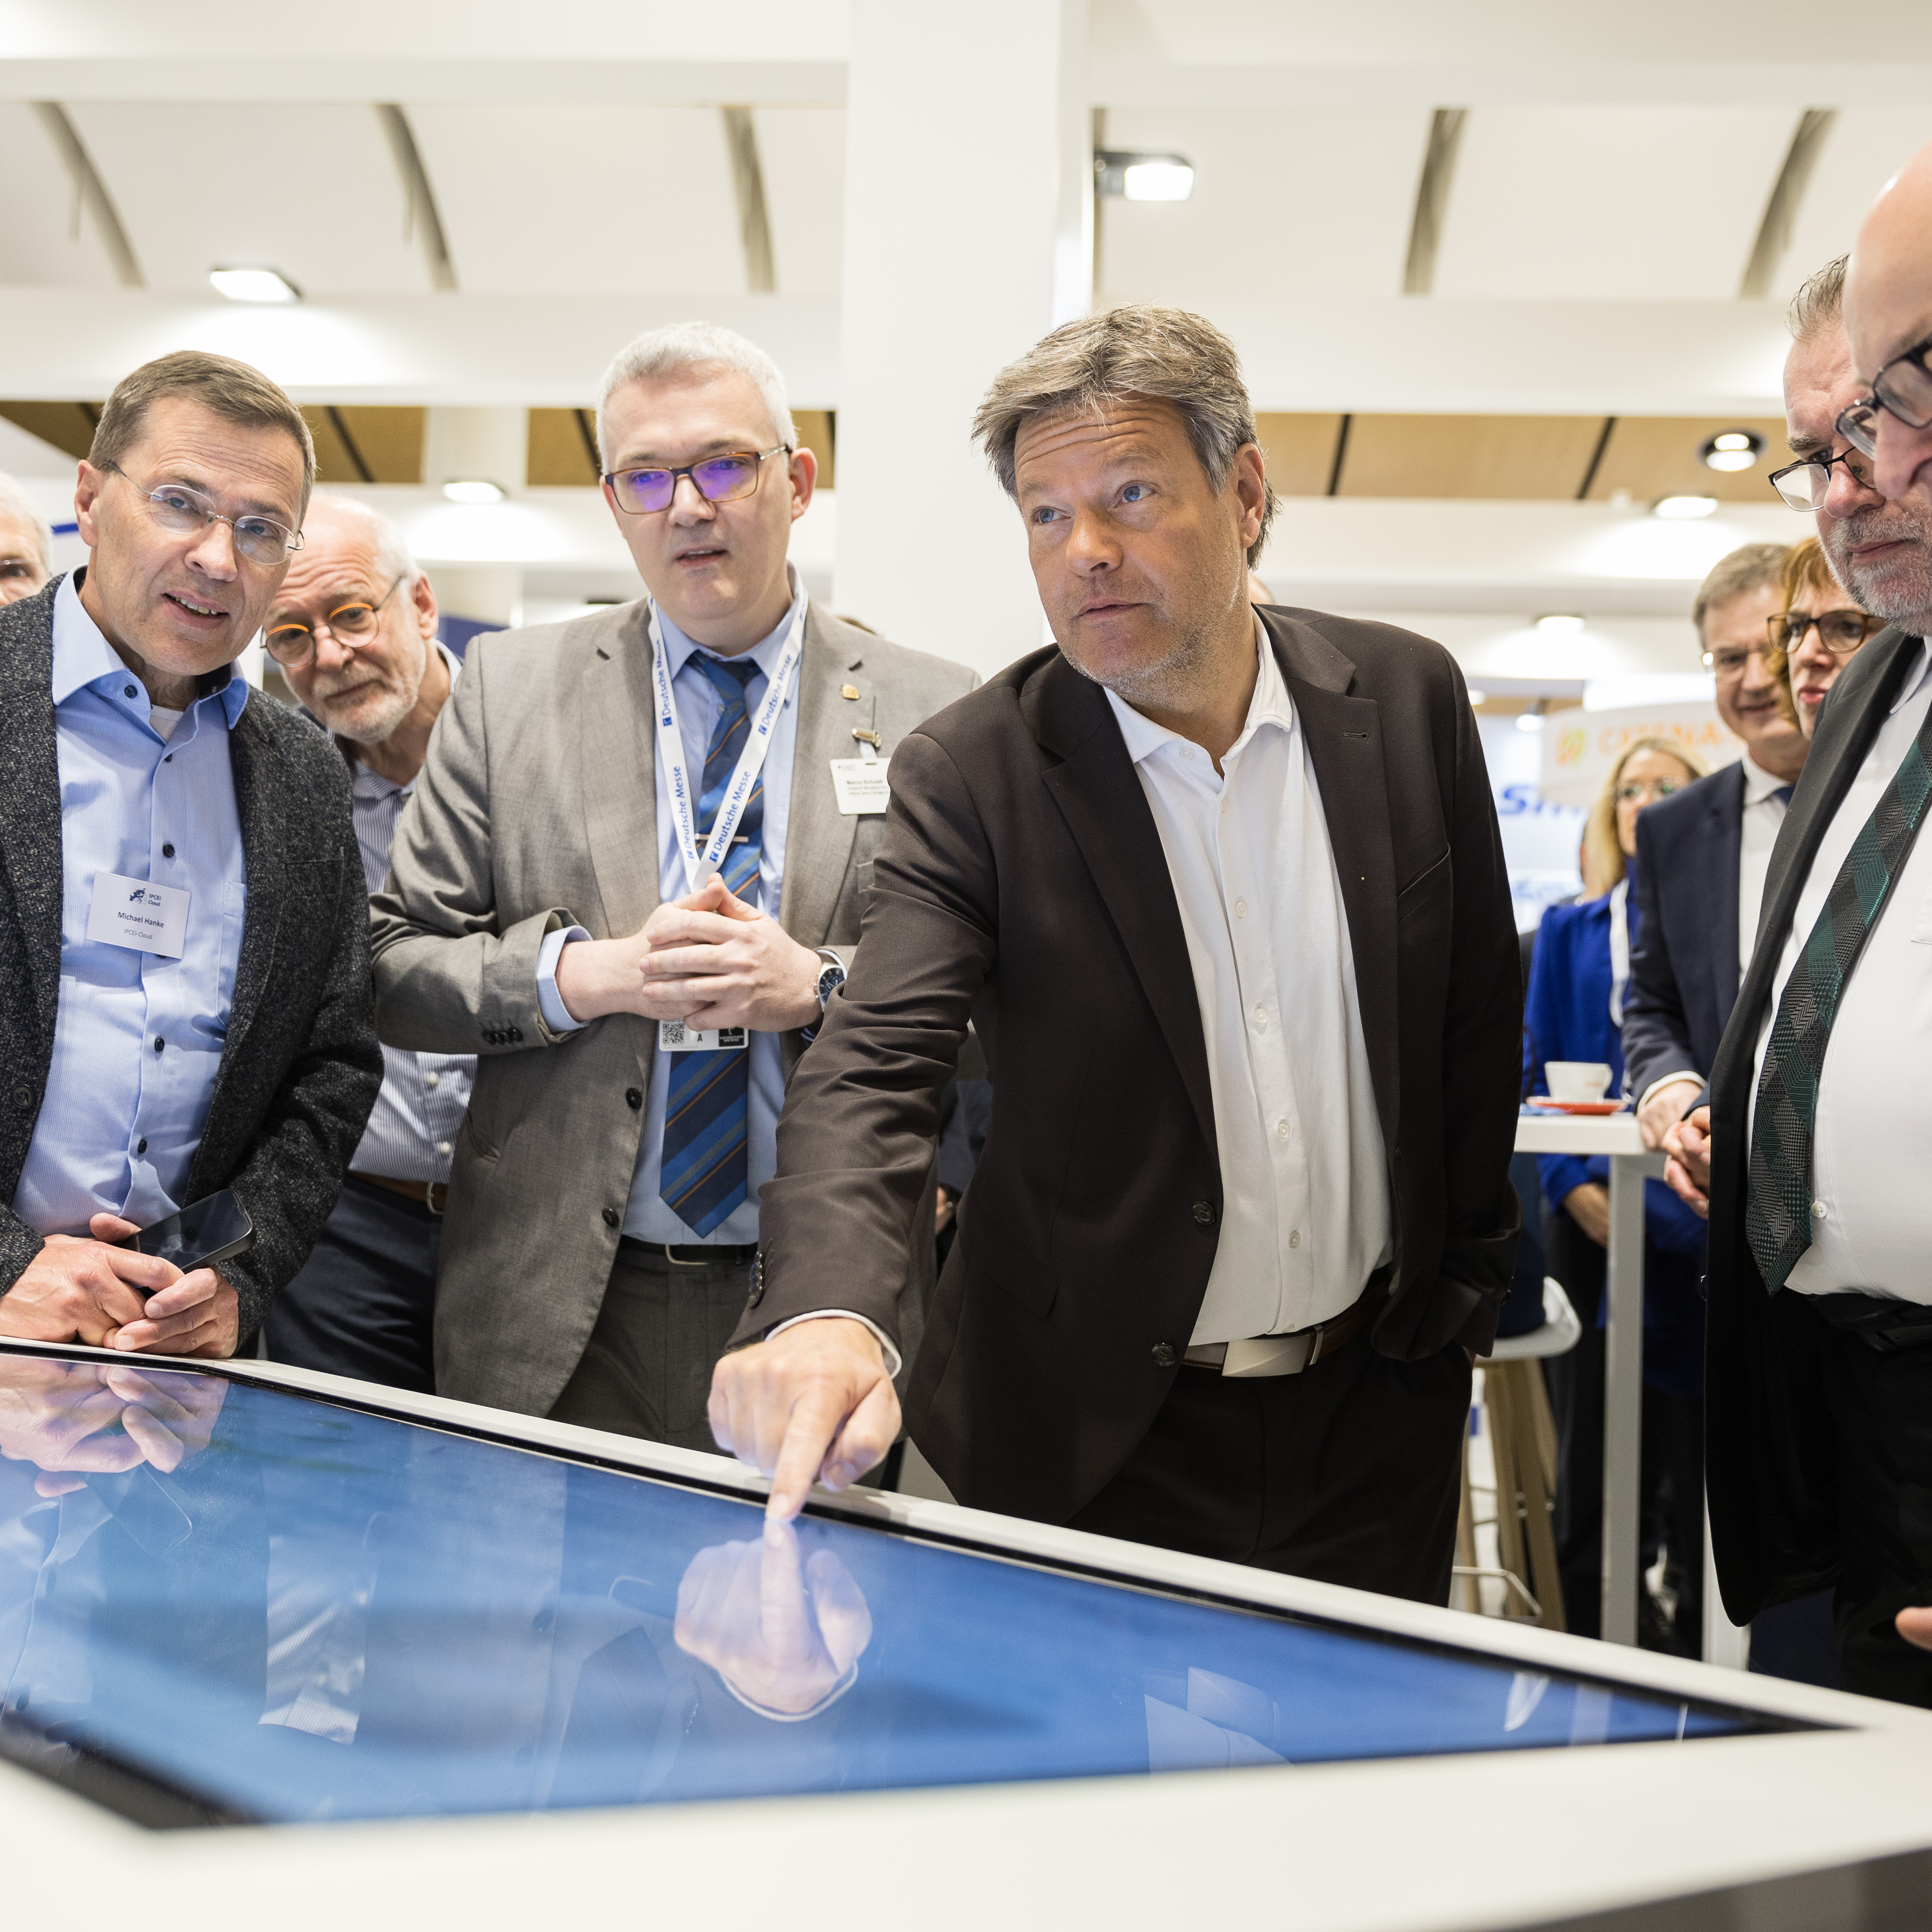 Federal Minister Robert Habeck visits the trade fair stand of Plattform Industrie 4.0. Pictured: Visiting IPCEI-Cloud.